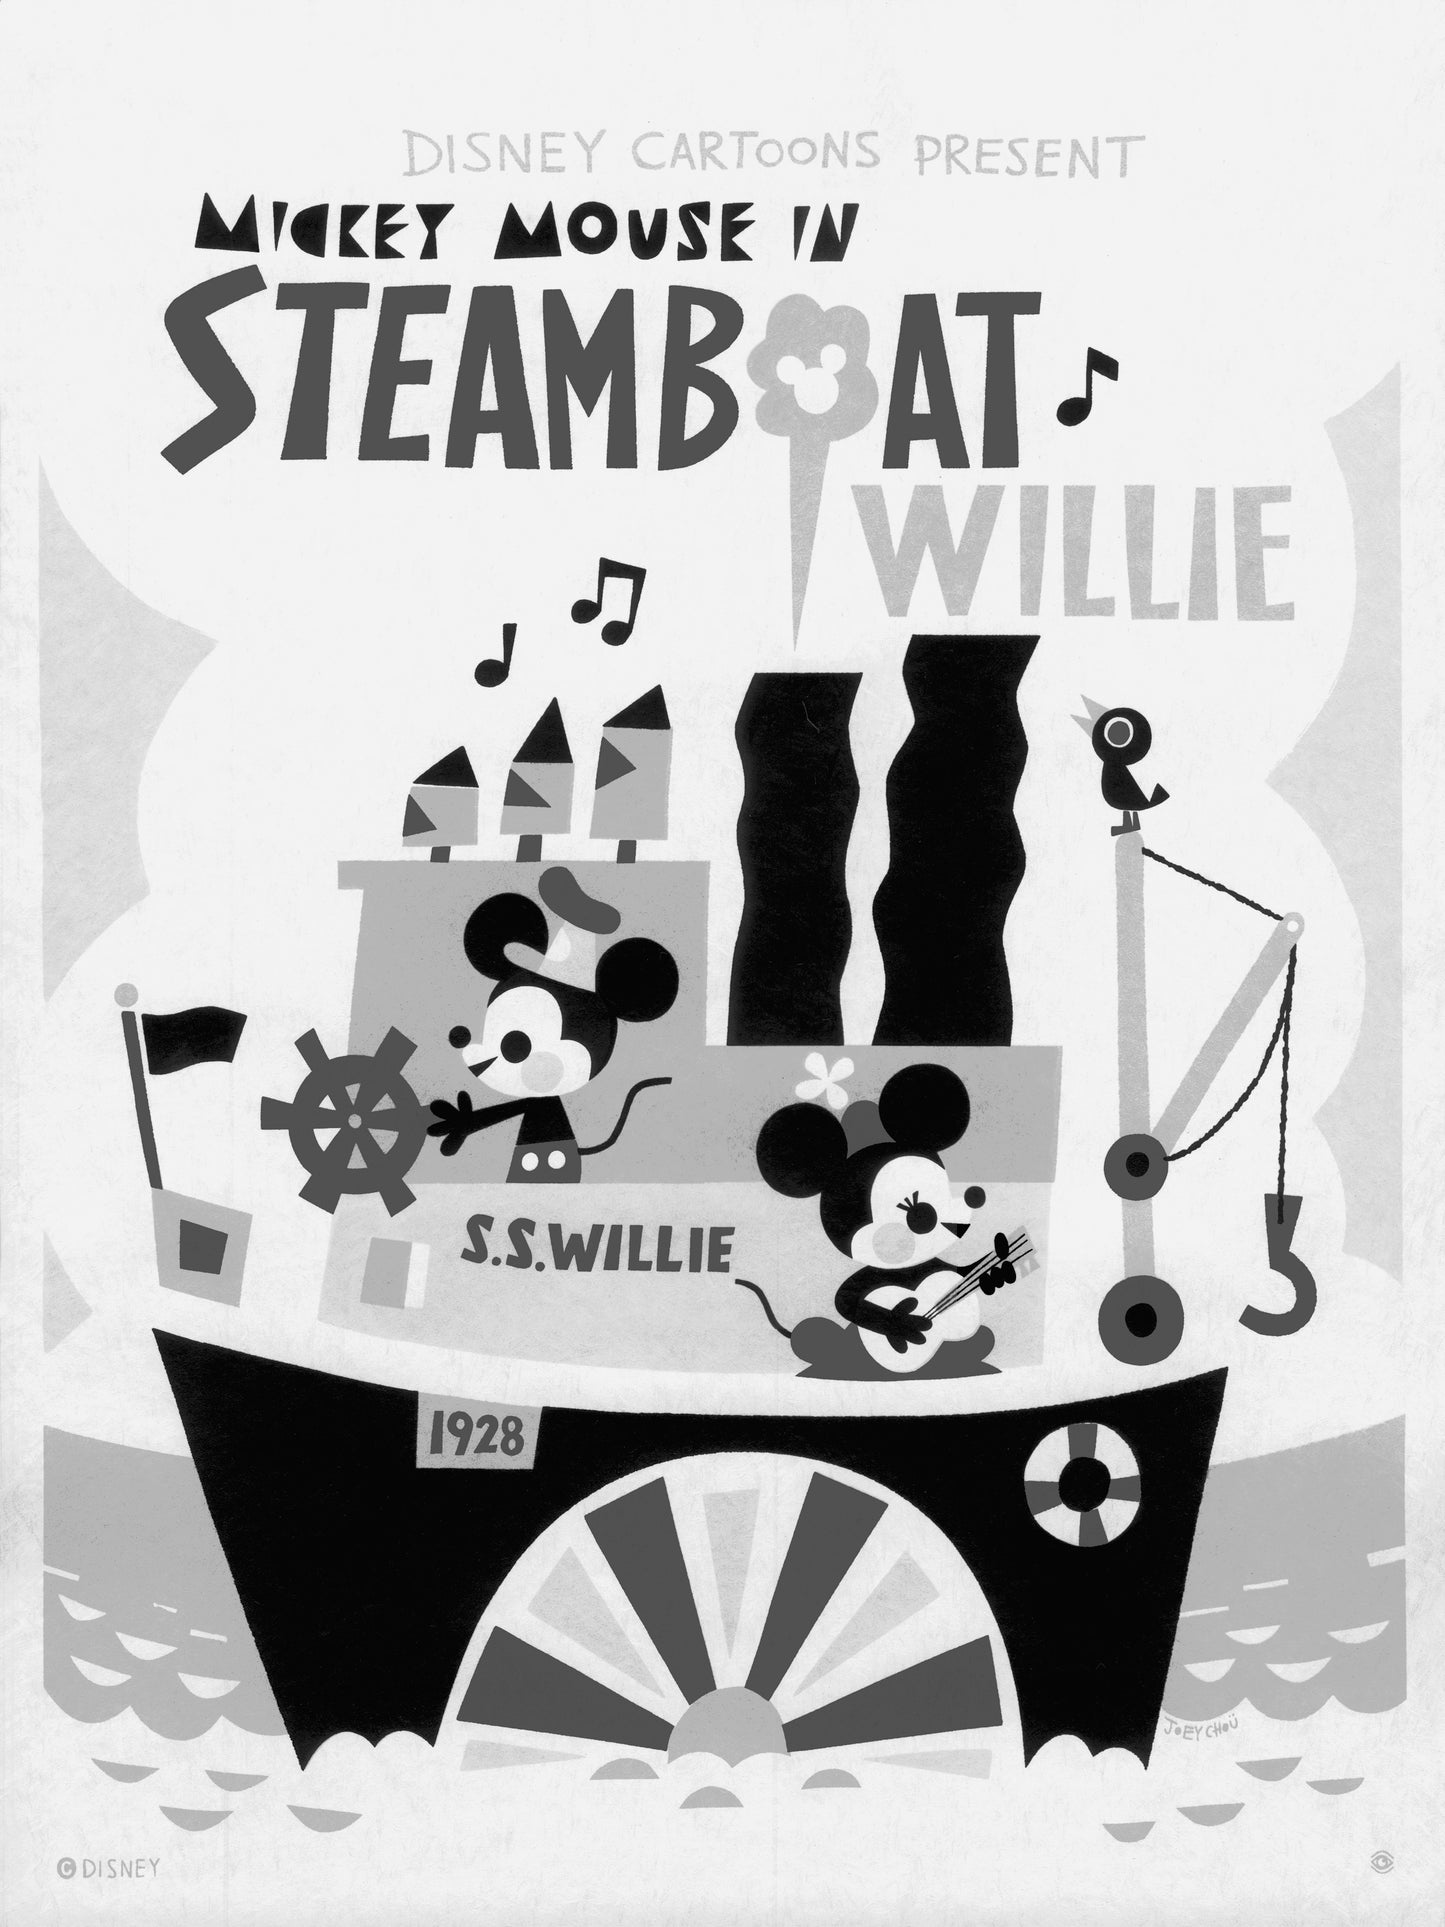 Steamboat Willie by Joey Chou